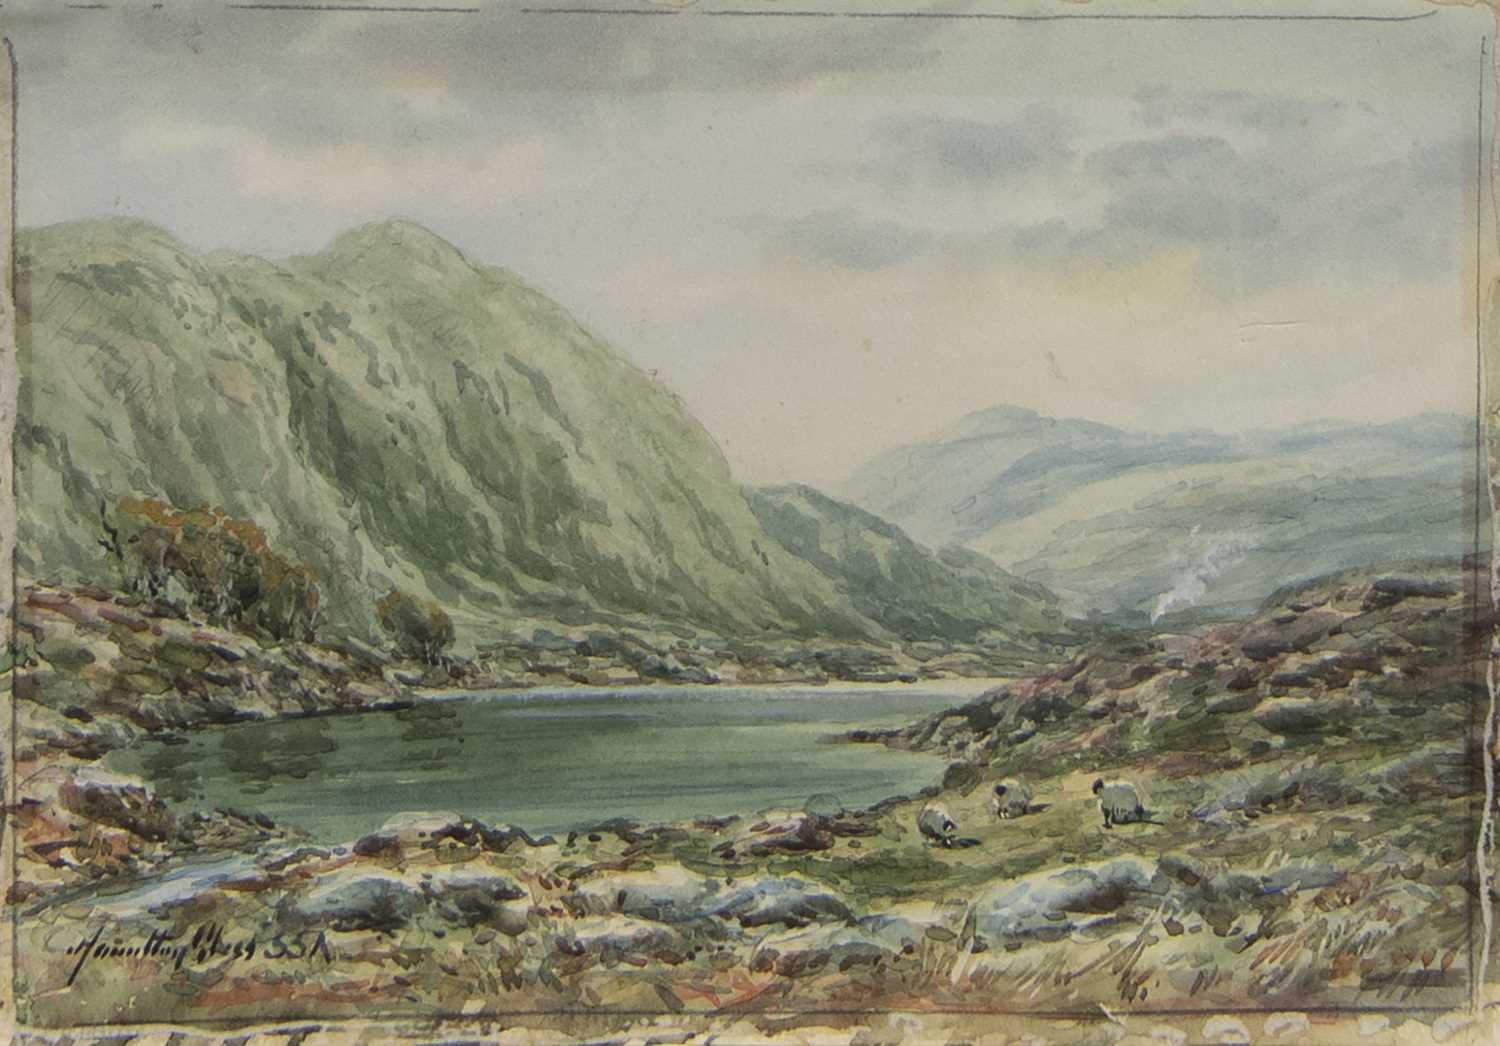 Lot 501 - SHEEP AT THE LOCH, A SCOTTISH WATERCOLOUR